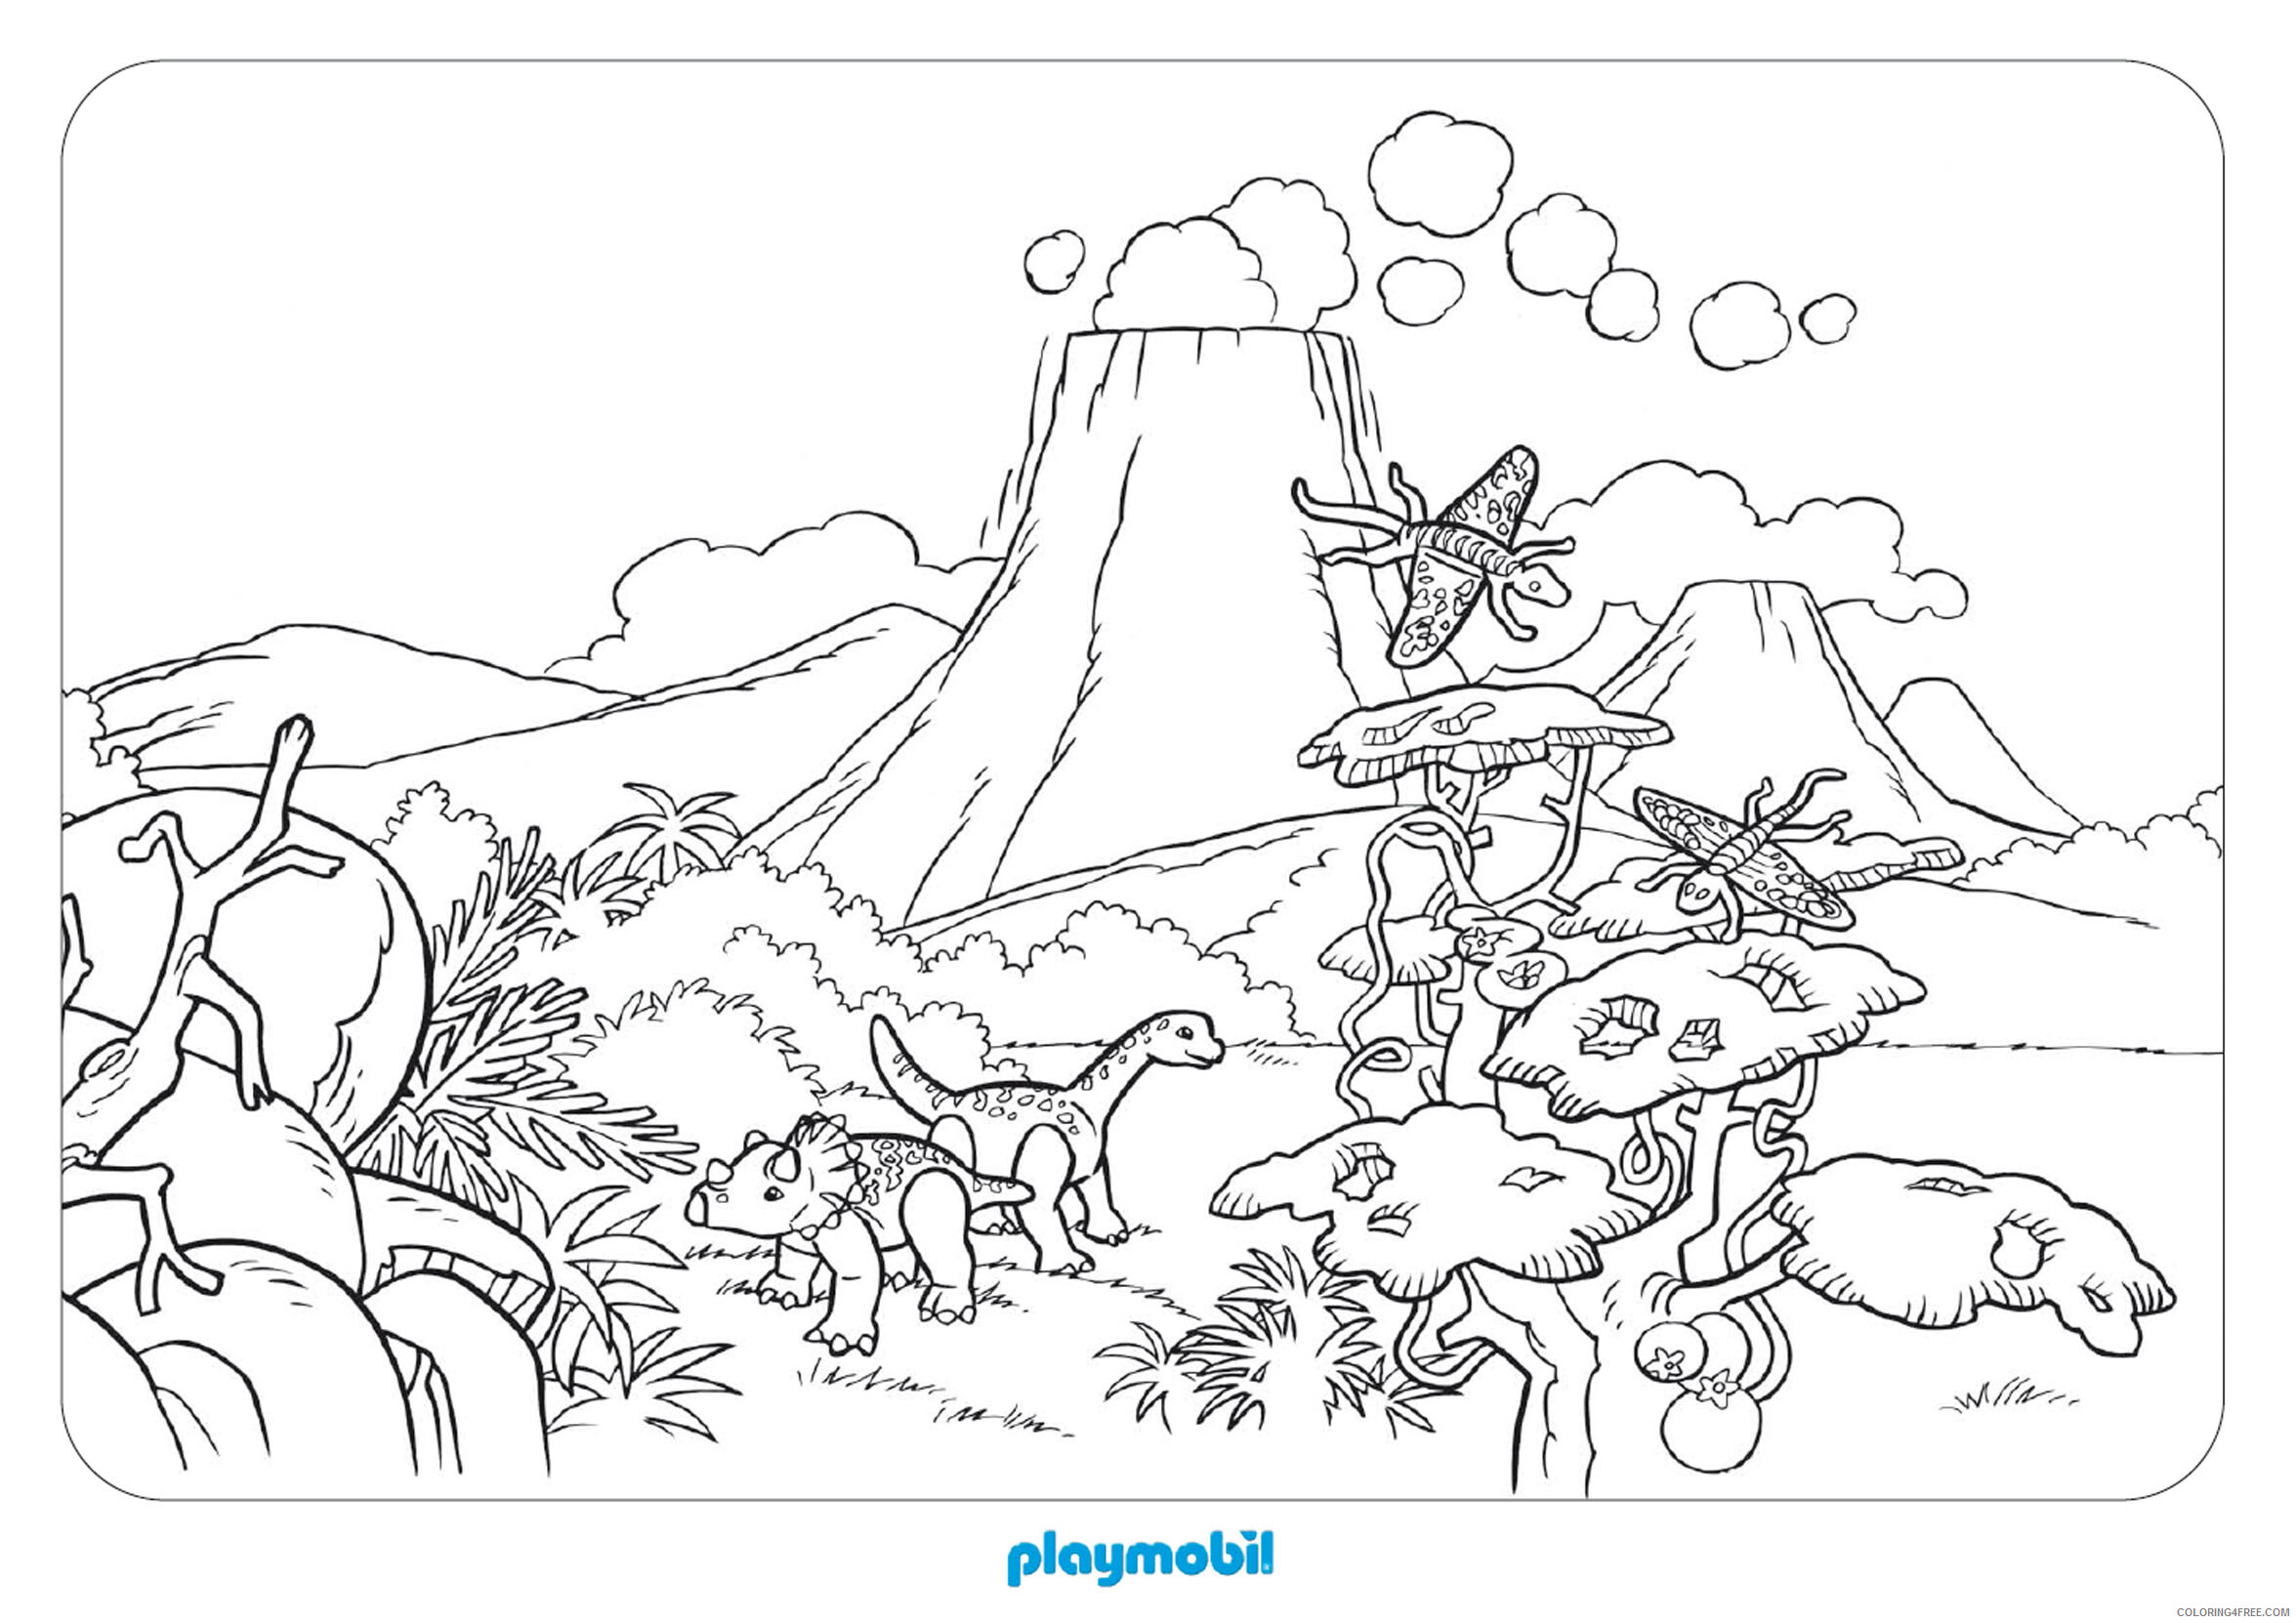 Playmobil Coloring Pages Playmobil Jurassic Scene Printable 2021 4647 Coloring4free